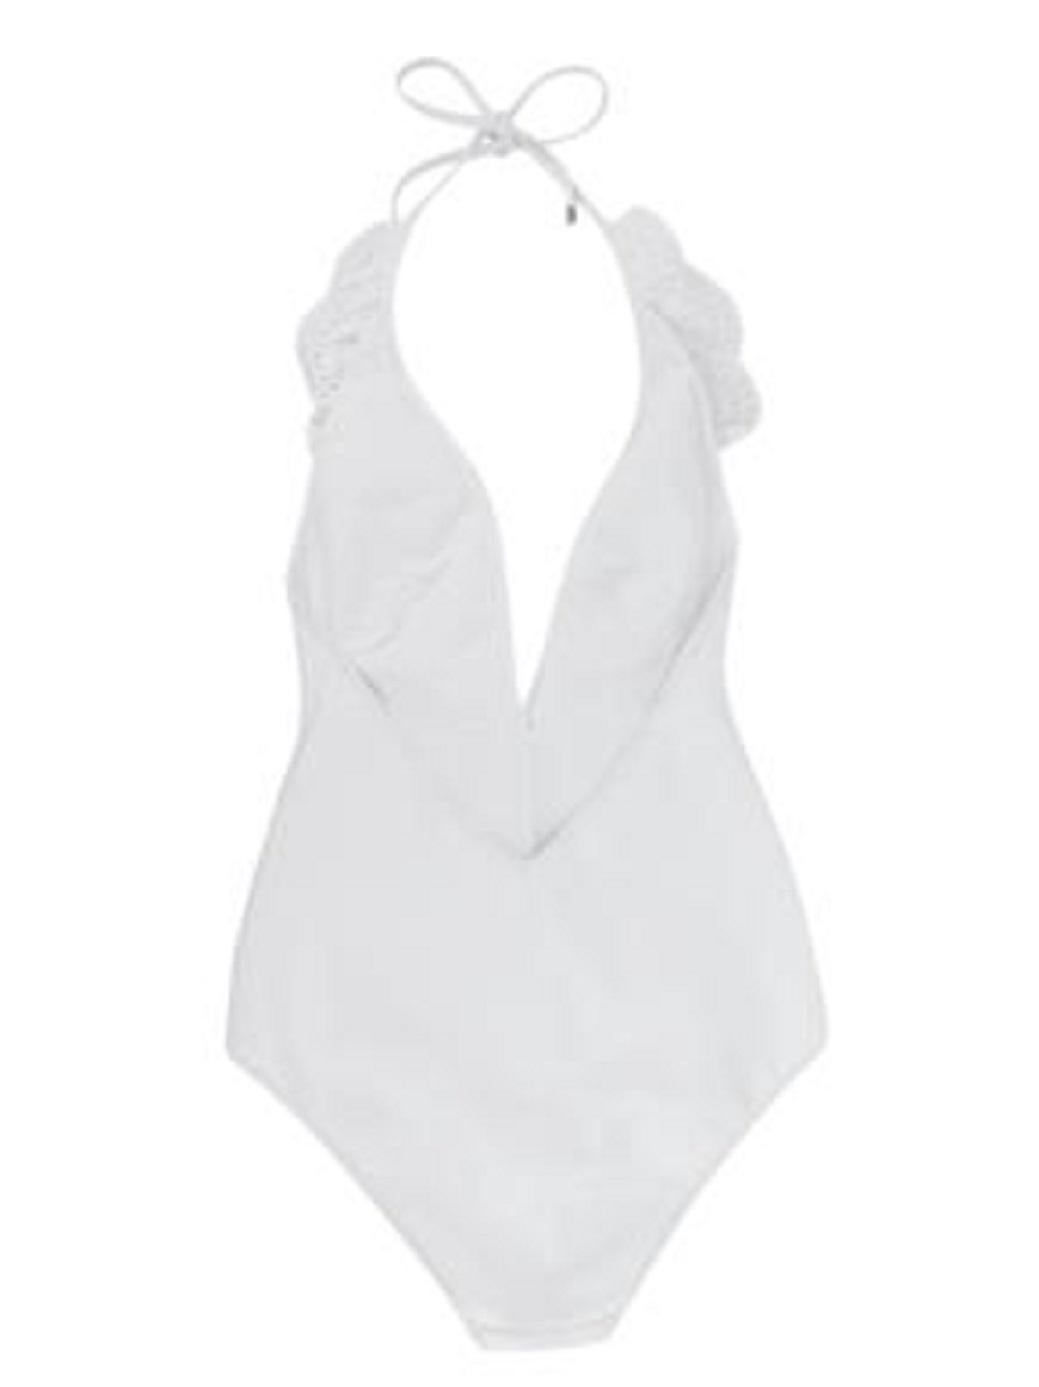 Zimmermann White Broderie Anglaise Trimmed Swimsuit In Excellent Condition For Sale In London, GB